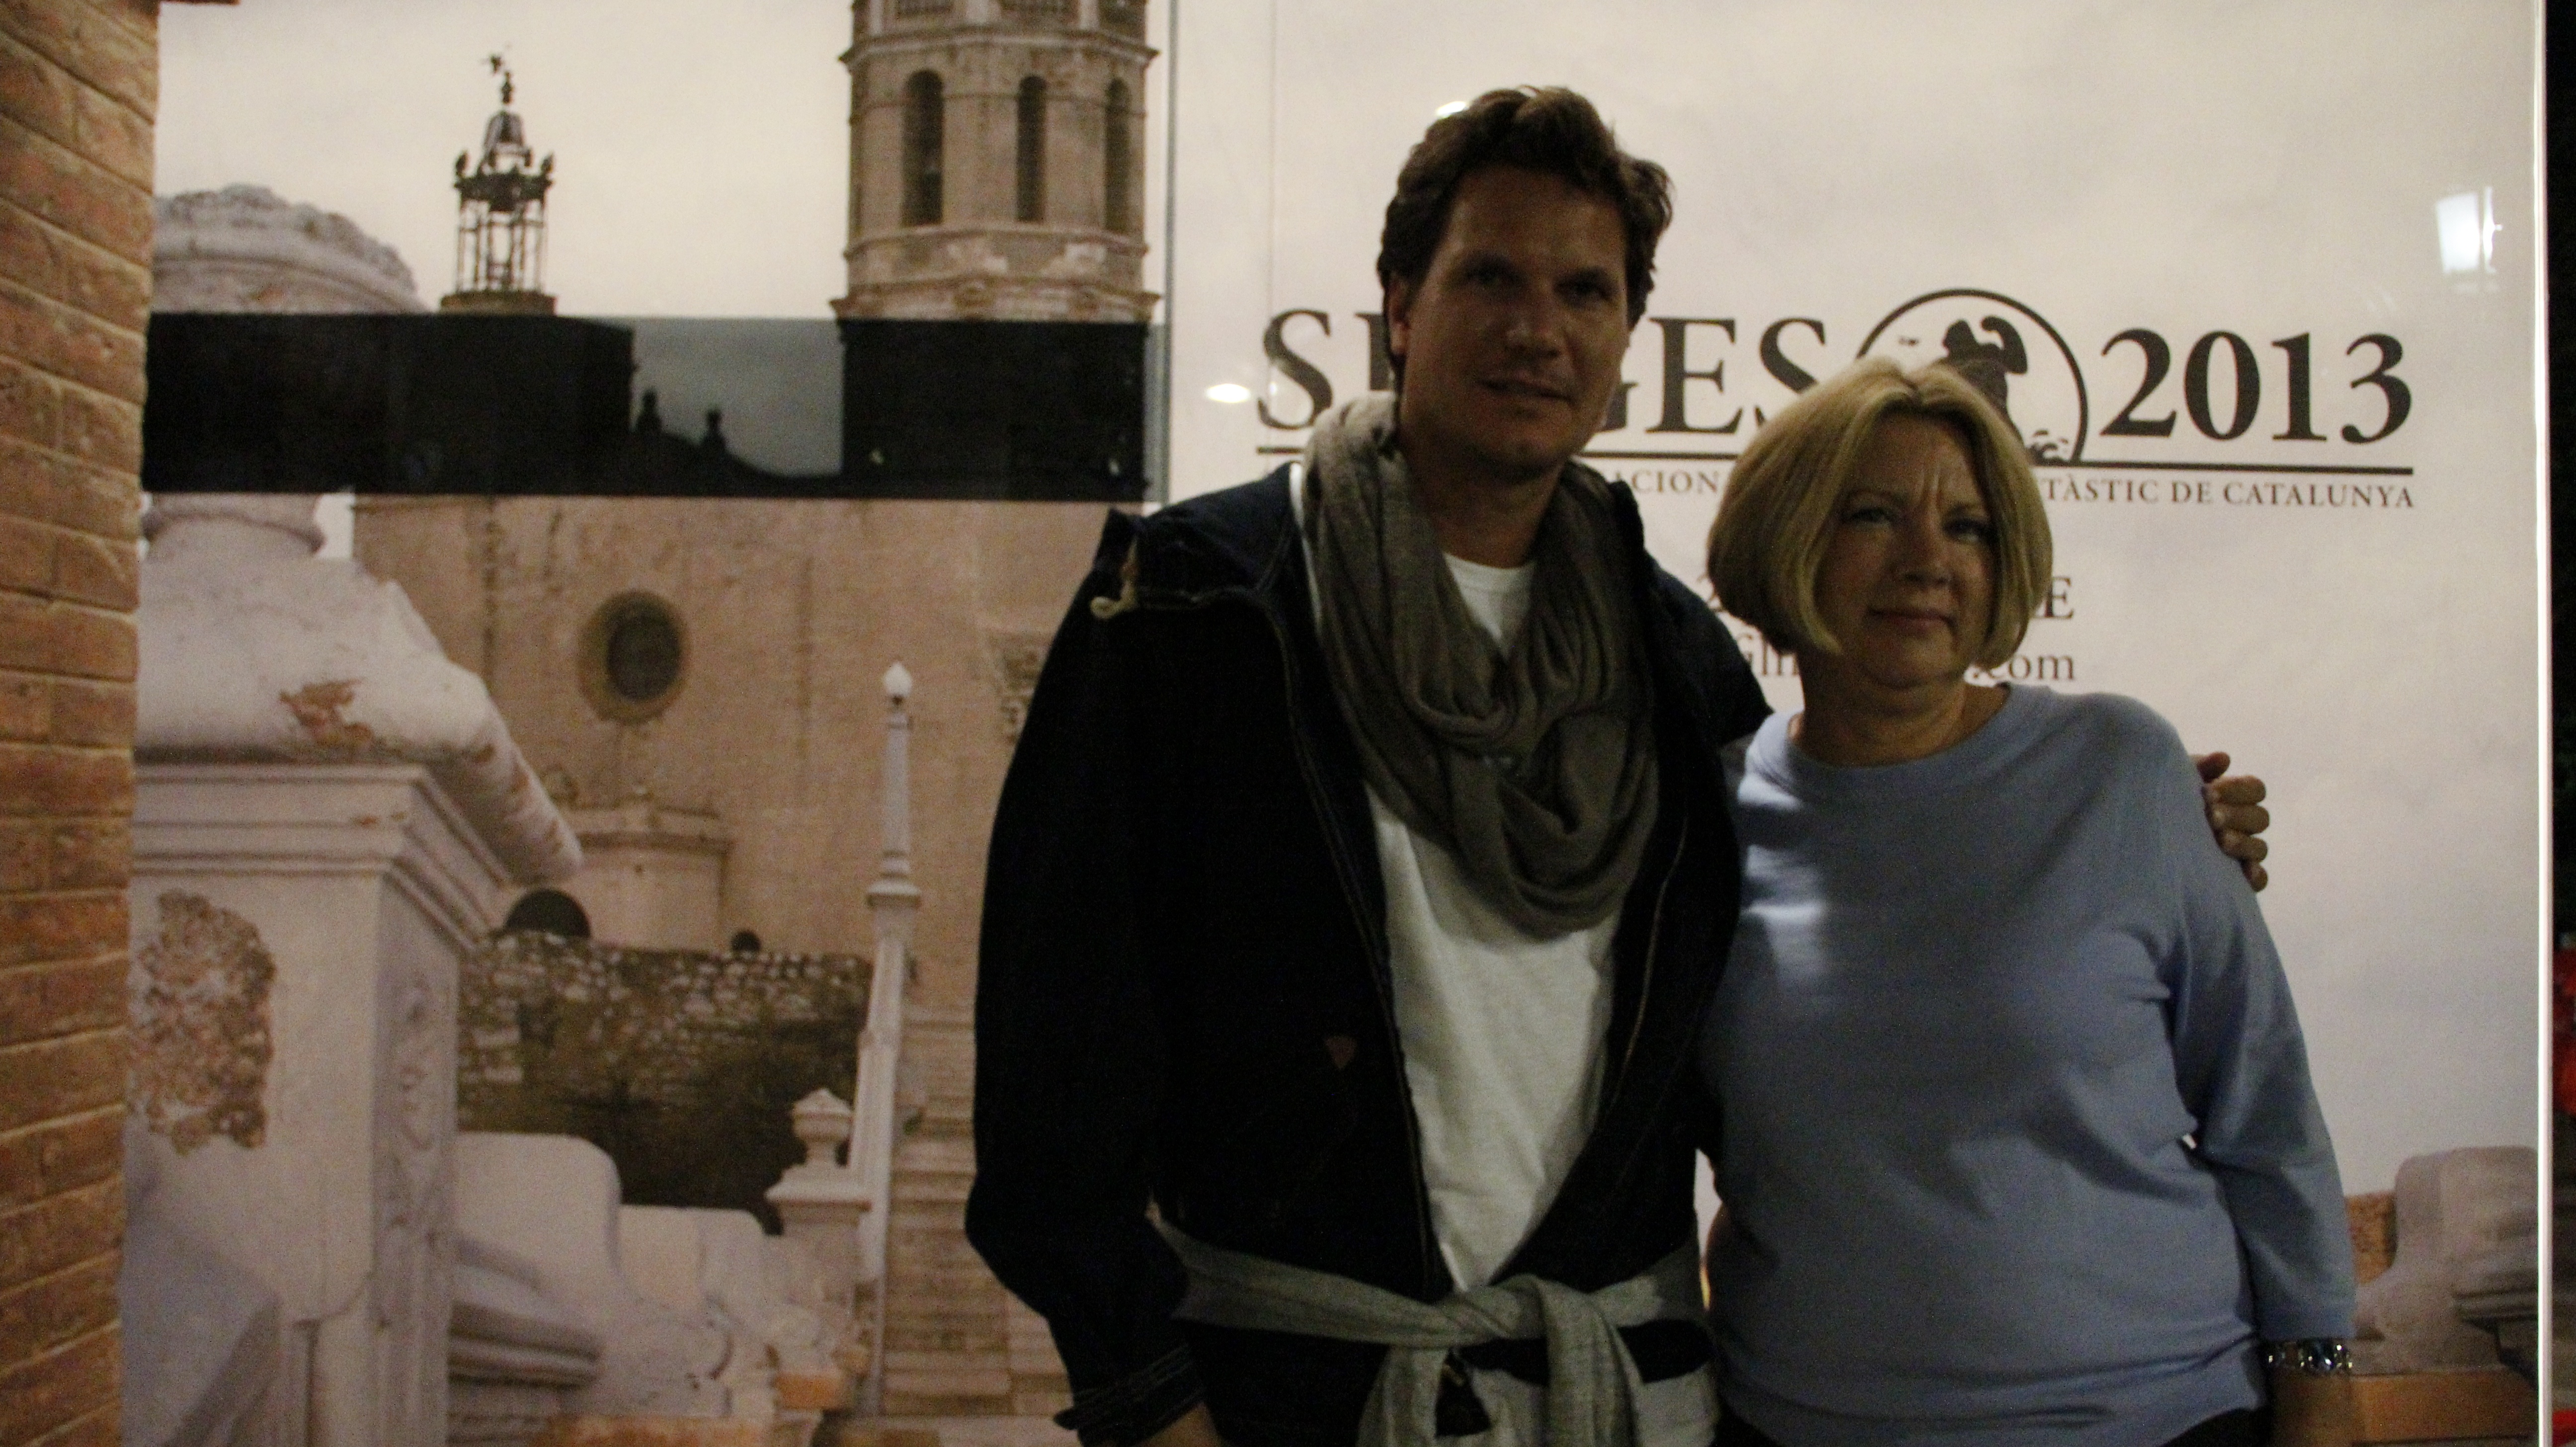 With filmmaker Daniel Gil Ebola at Sitges Film Festival-each with films competing in PHONETASTIC, 